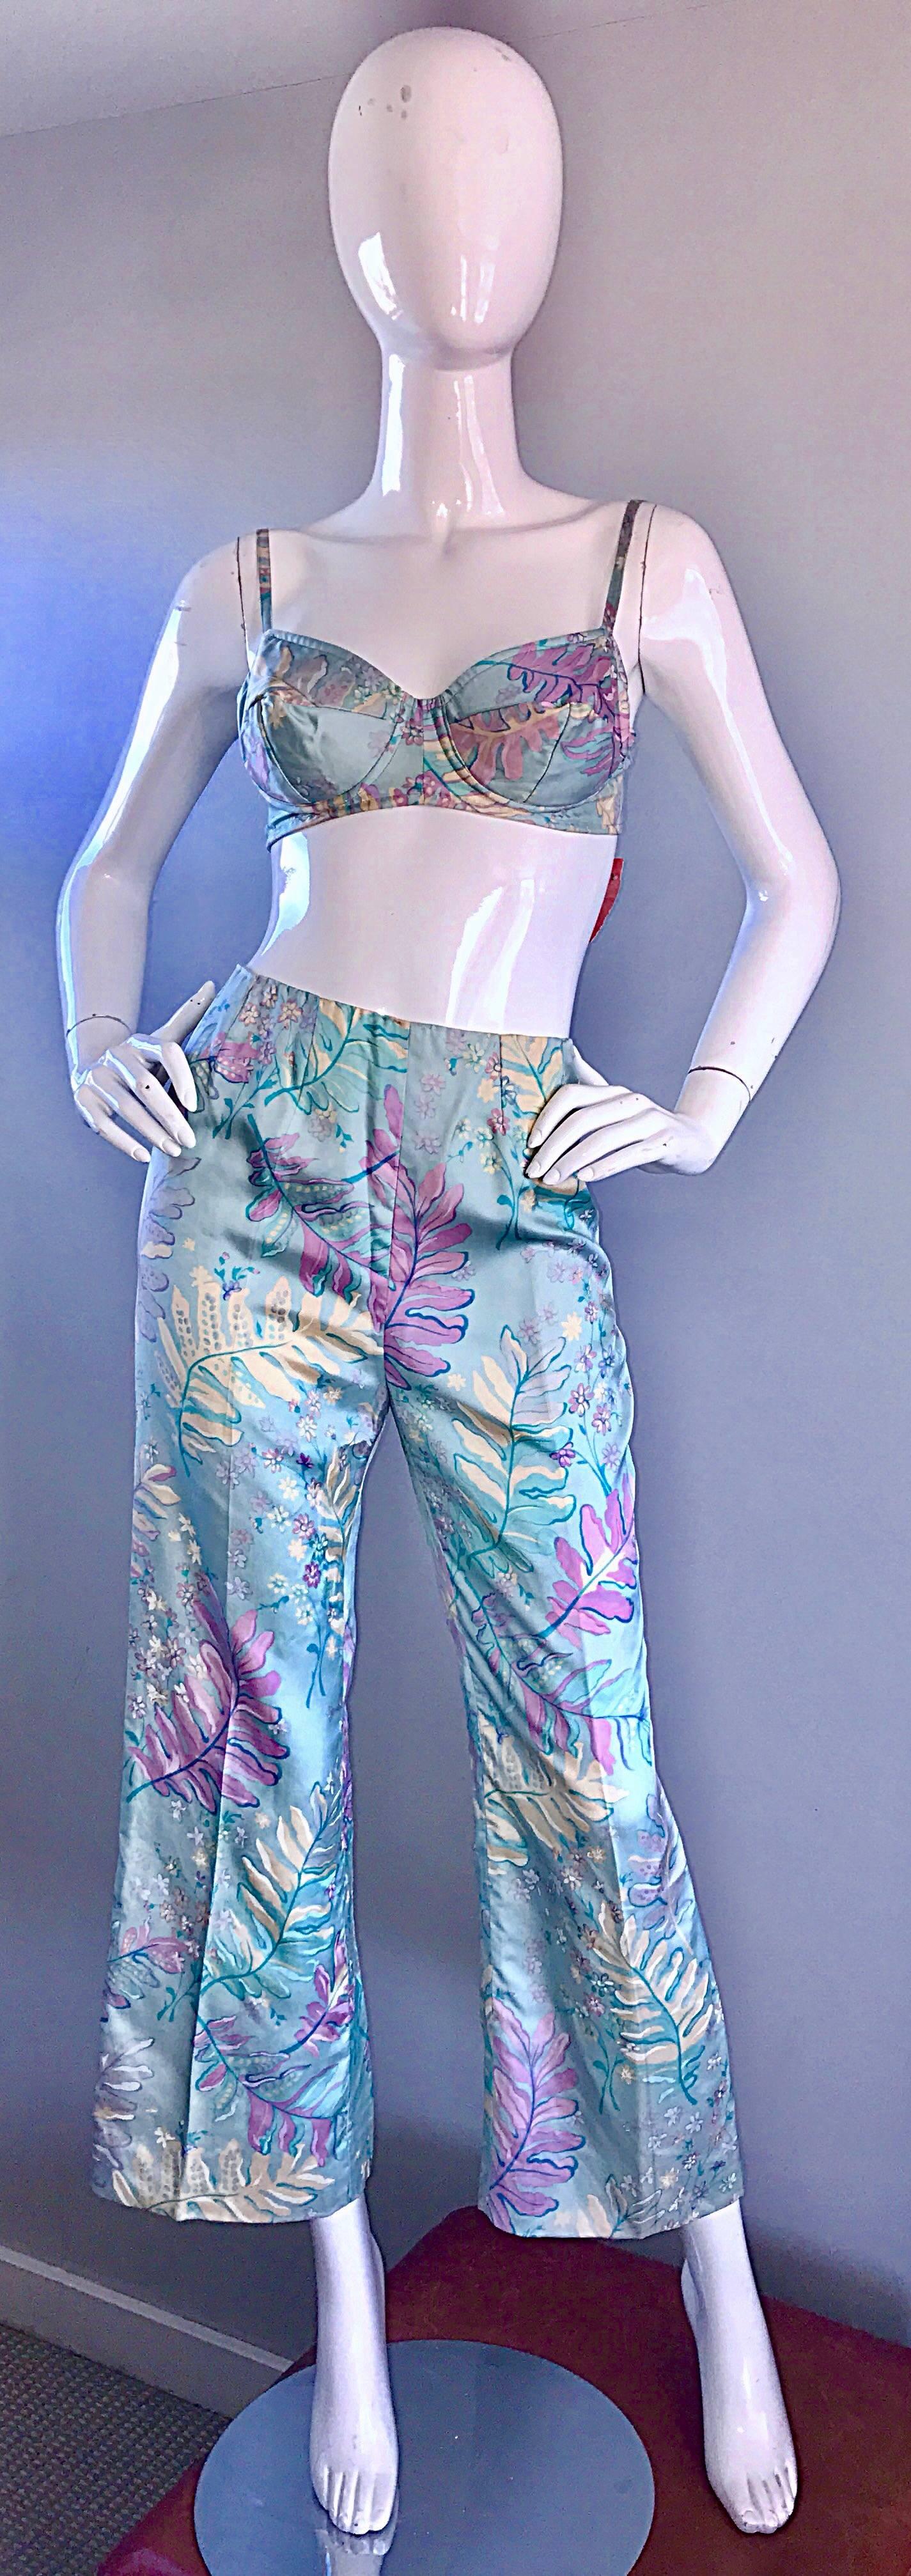 Sexy vintage 60s ELIGLAU MILANO brand new with original price tags attached silk bra and pants ensemble! Channel your inner bombshell movie star self! Pale blue, with purple and ivory leaves throughout. High waisted fit, with a hidden metal zipper